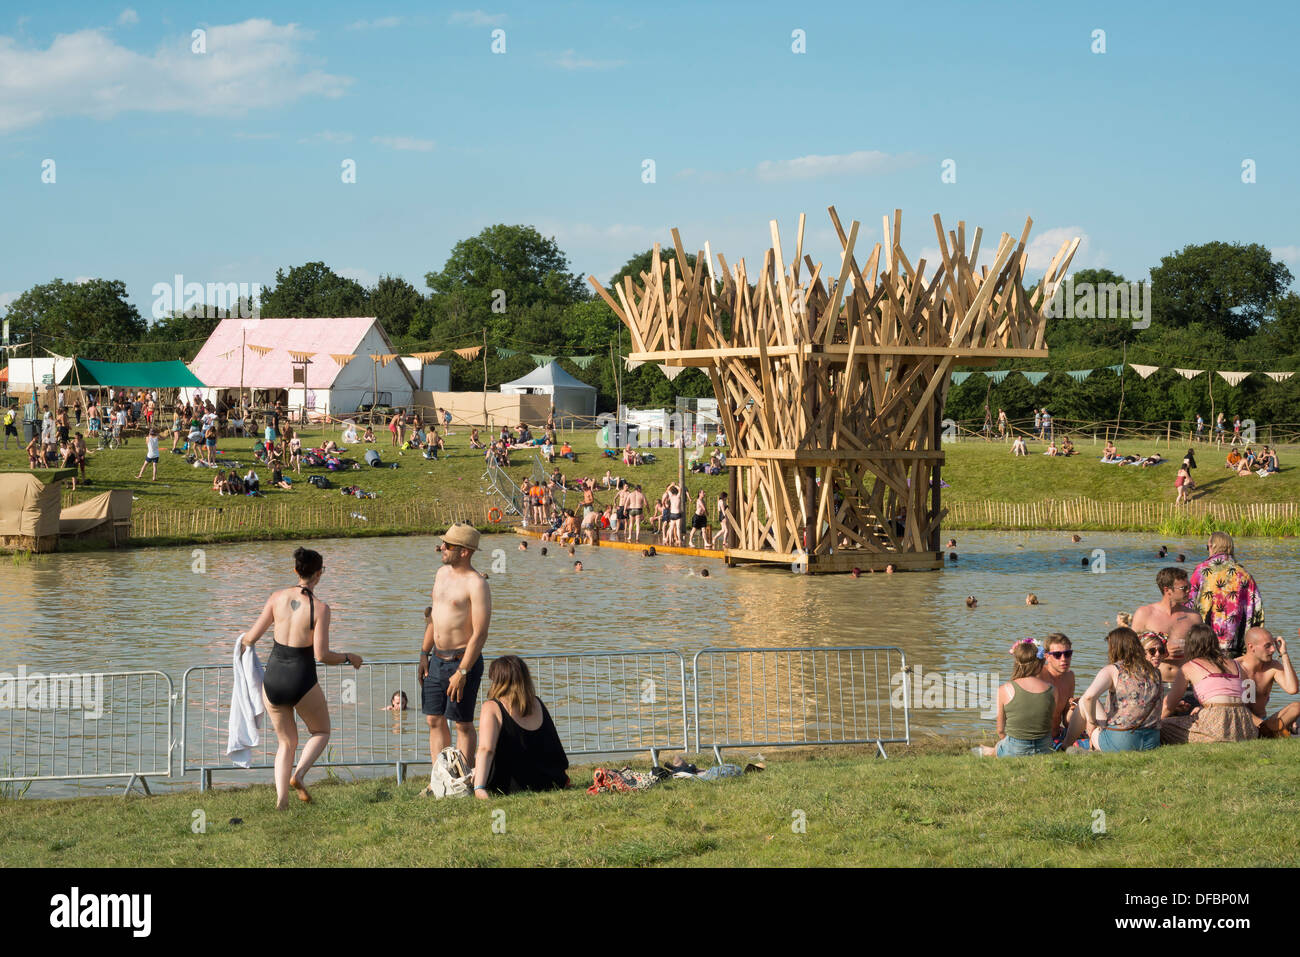 The Temple, Abbots Ripton, United Kingdom. Architect: Andrew T Cross, 2013. Overall view of festival site. Stock Photo